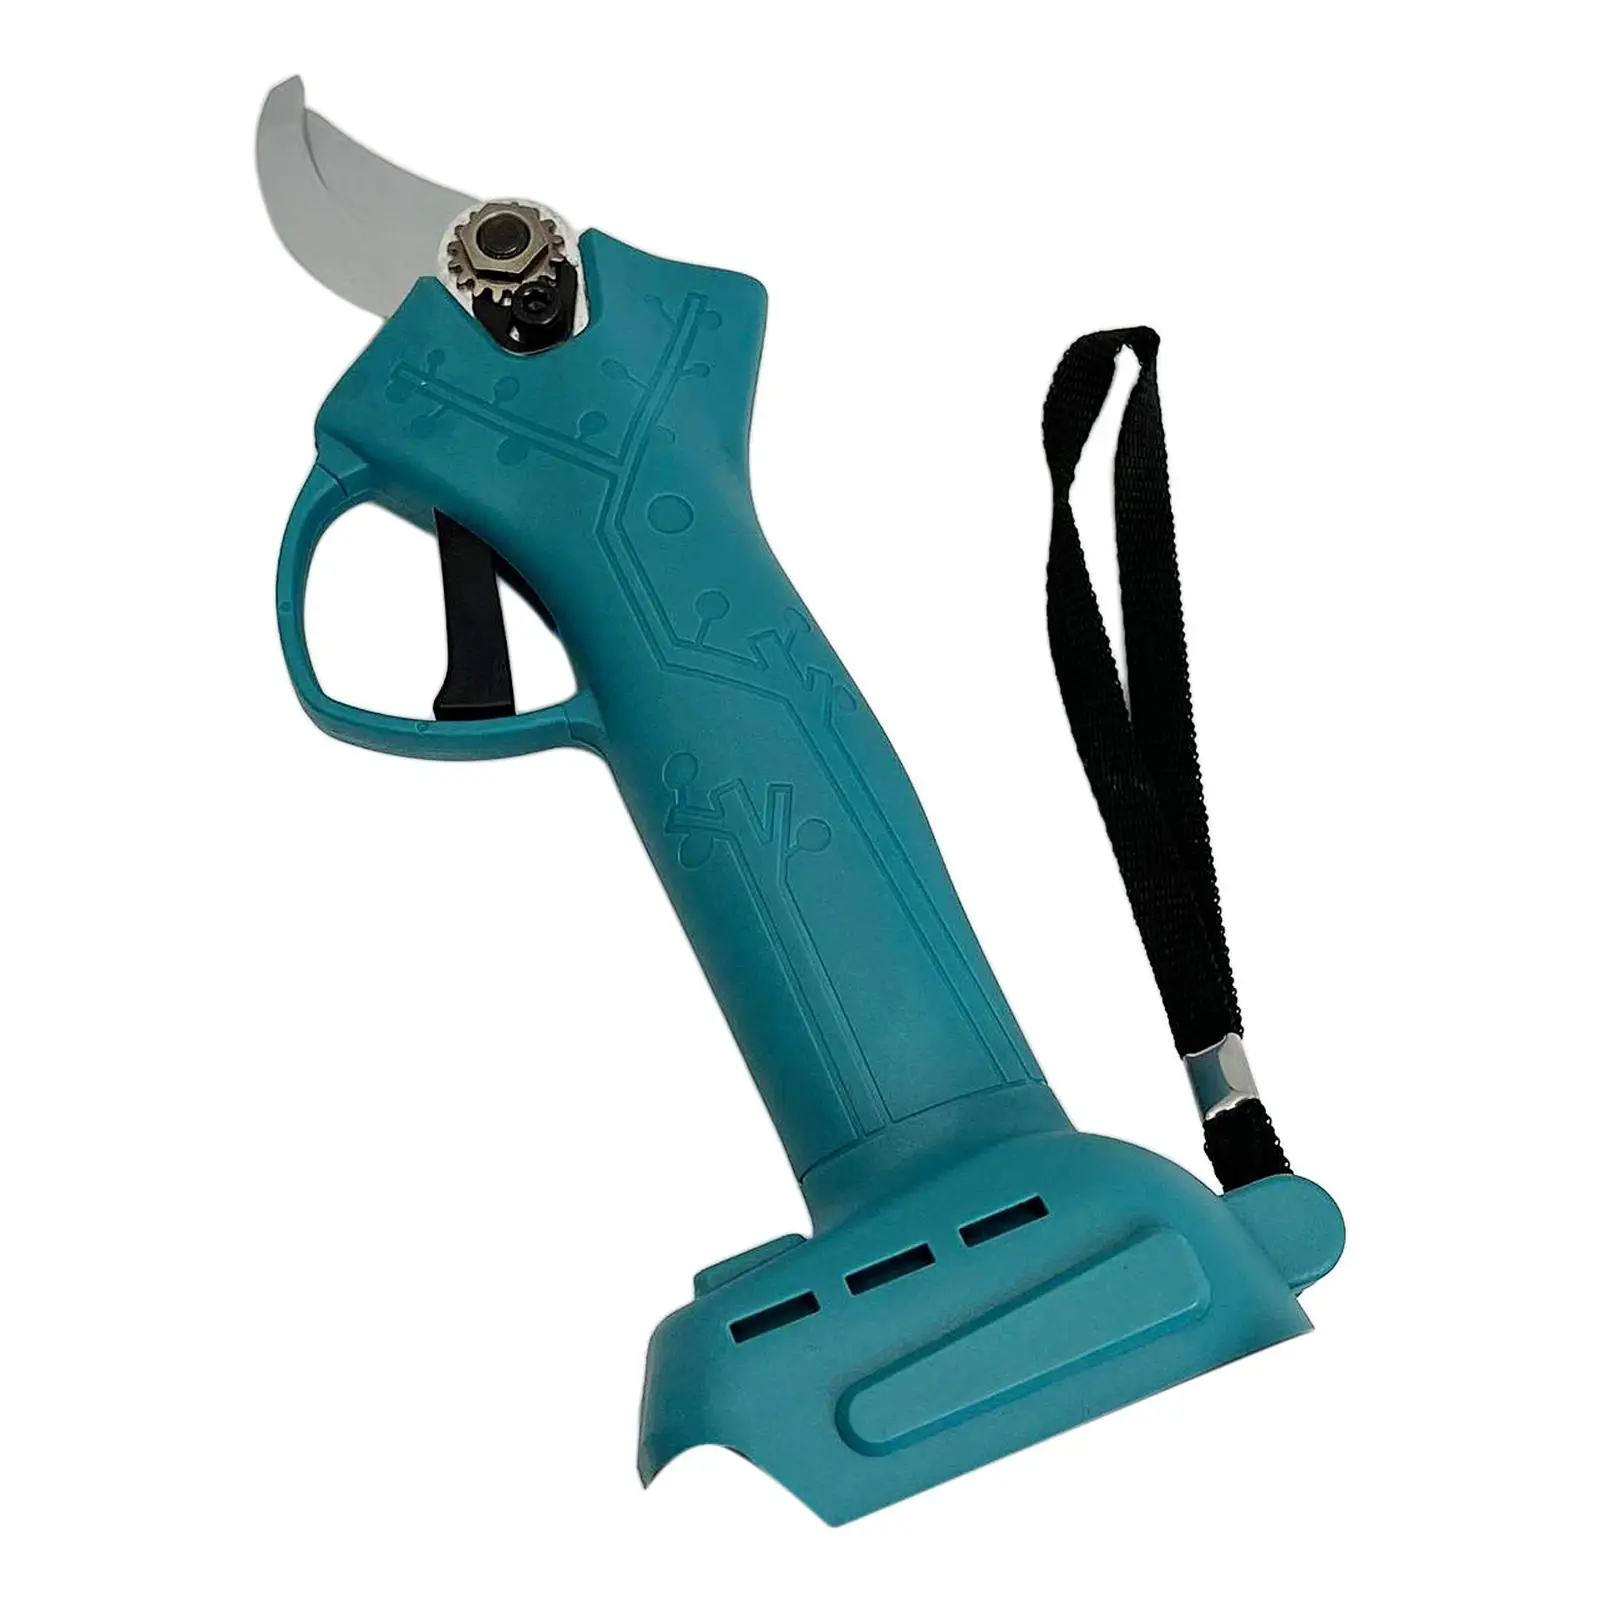 Electric Pruning Shears Anti Slip Grip Garden Trimming Clipper Gardening Cutter Gardening Shears Clippers for Vineyards